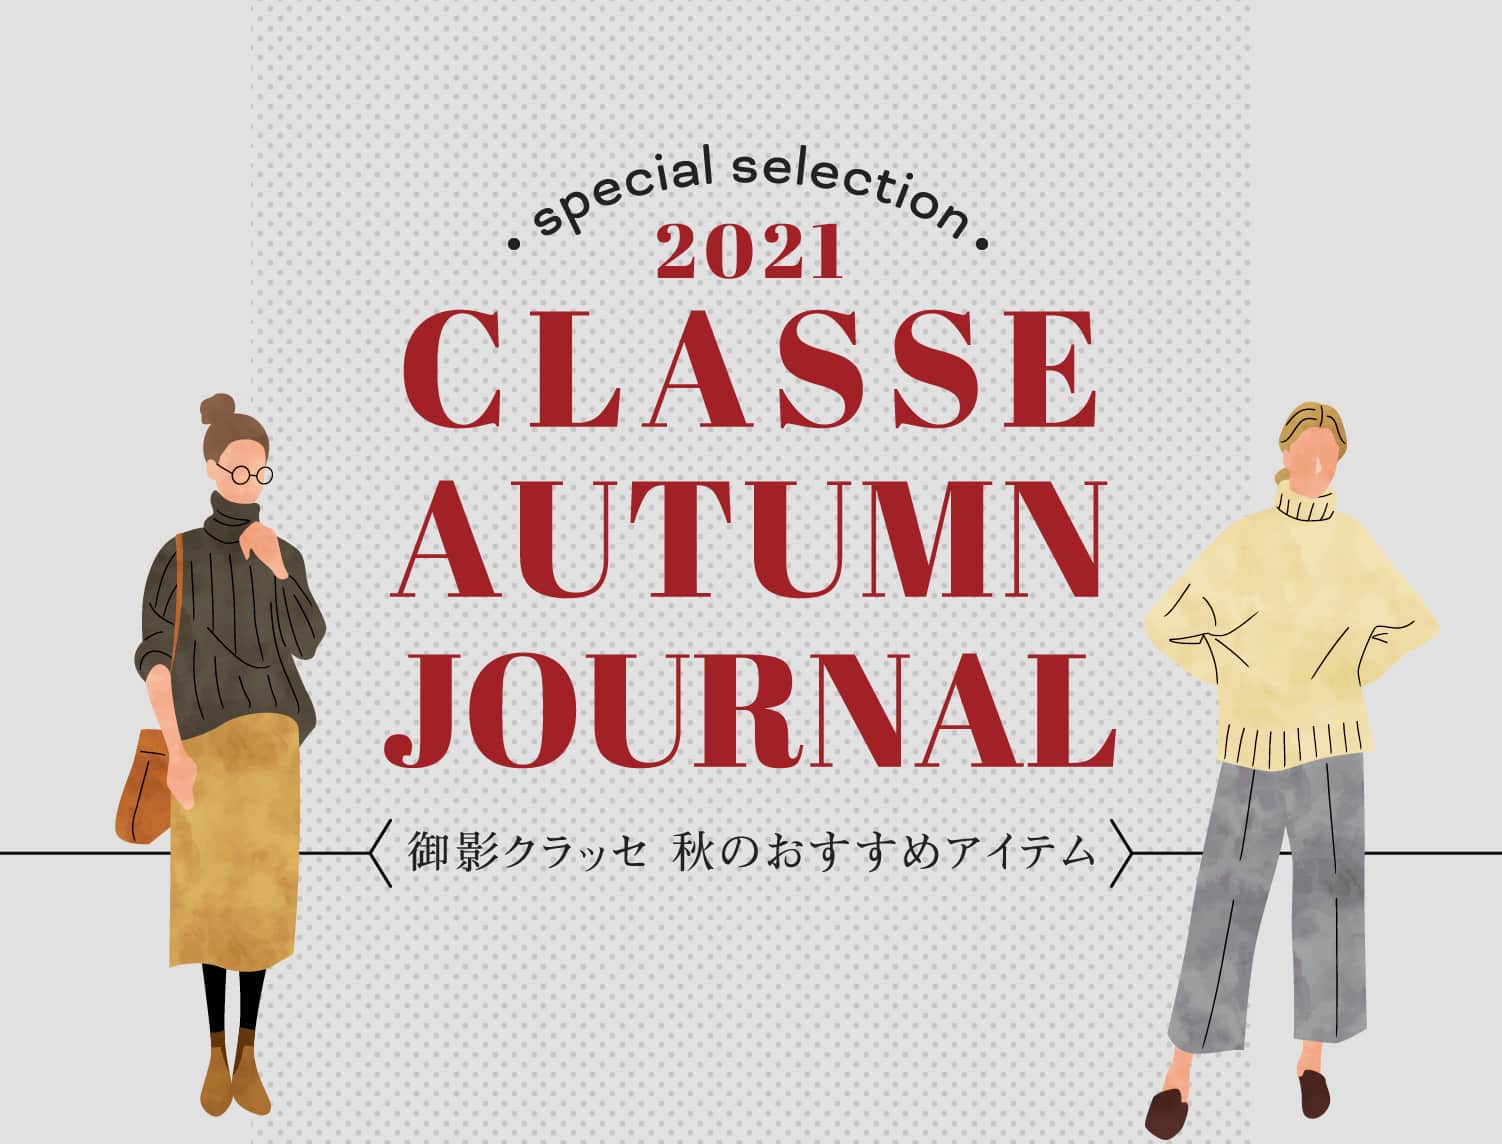 special selection 2021 CLASSE AUTUMN JOURNAL 御影クラッセ 秋のおすすめアイテム 